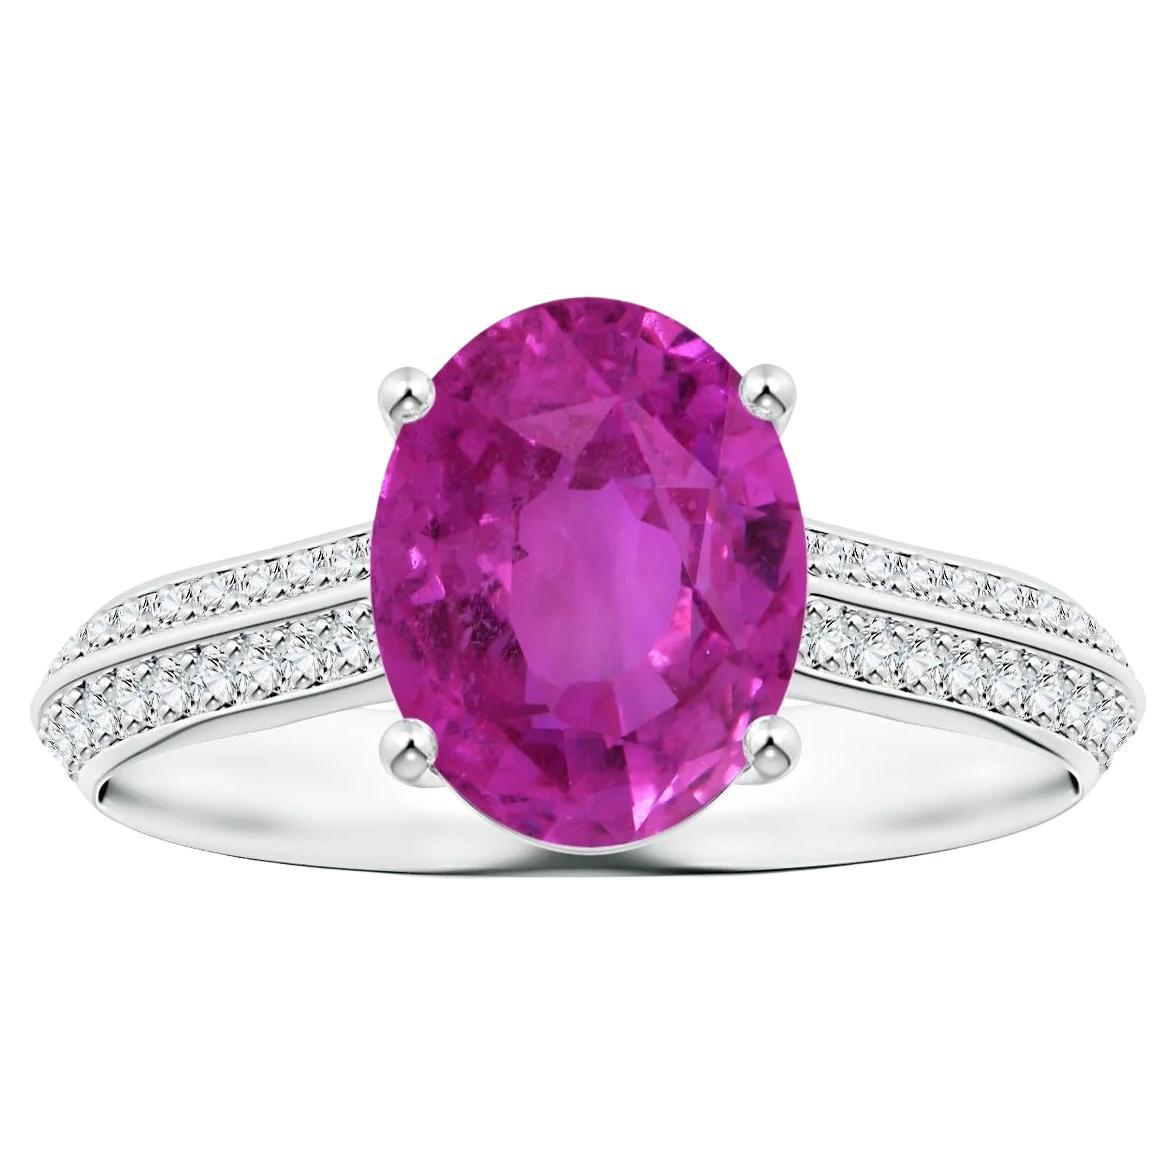 For Sale:  GIA Certified Pink Sapphire Knife Edge Ring in Platinum with Diamonds